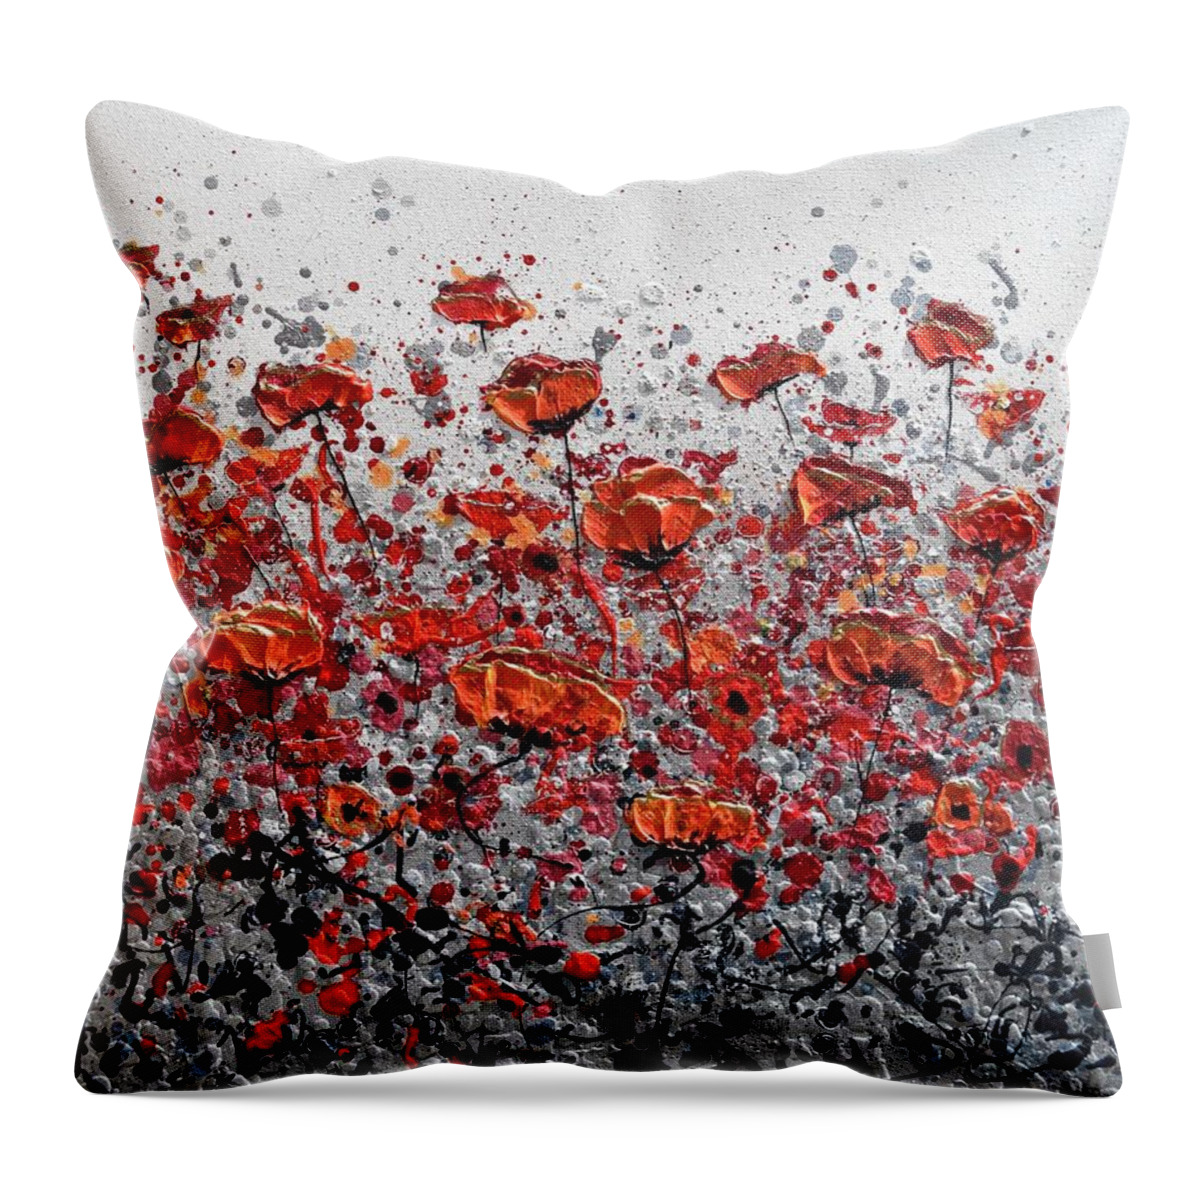 Red Poppies Throw Pillow featuring the painting Summer Time by Amanda Dagg